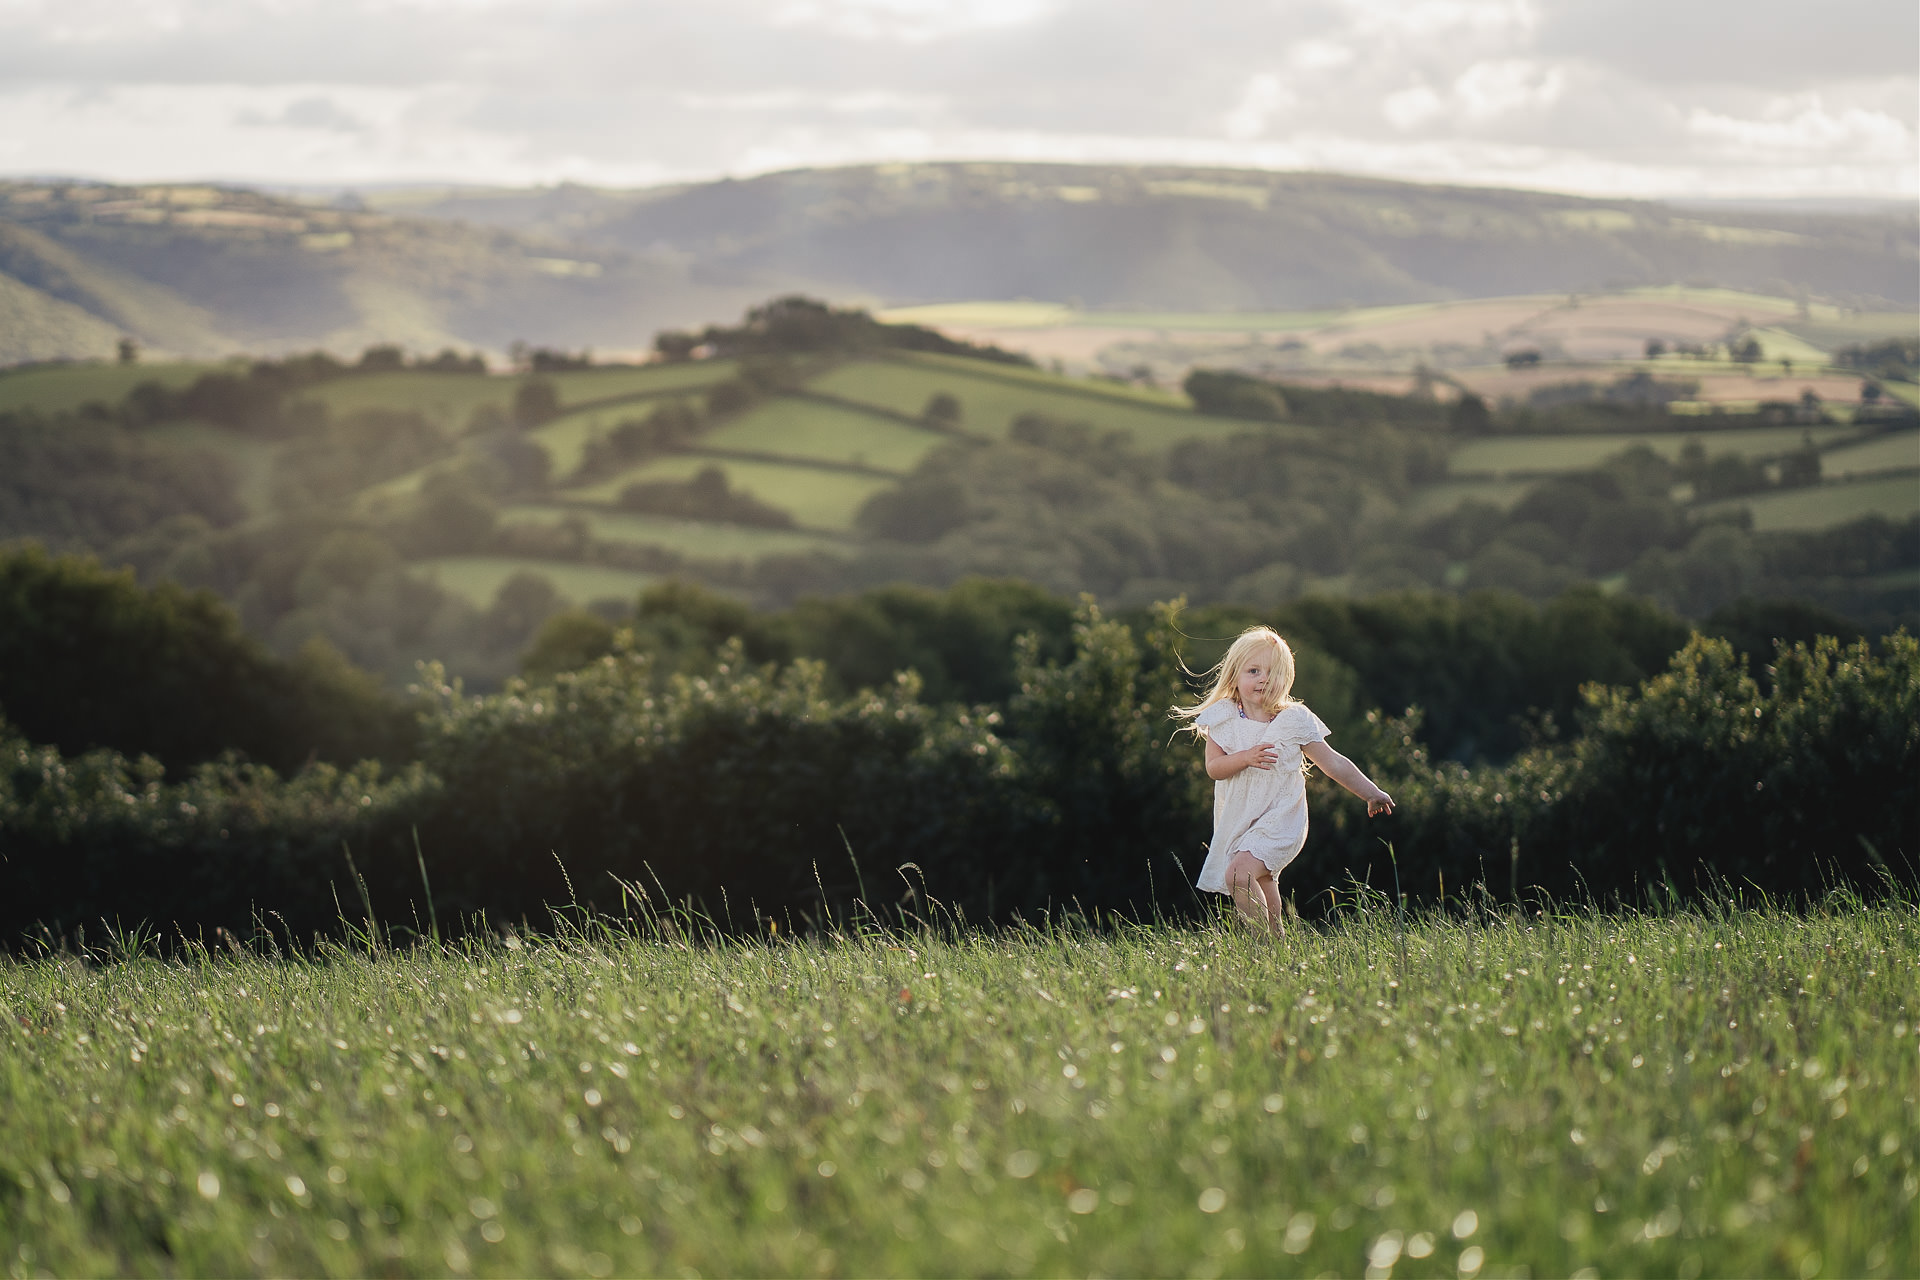 Best Devon family photography: a portrait of a young girl in a white dress running across a field with Devon hills behind